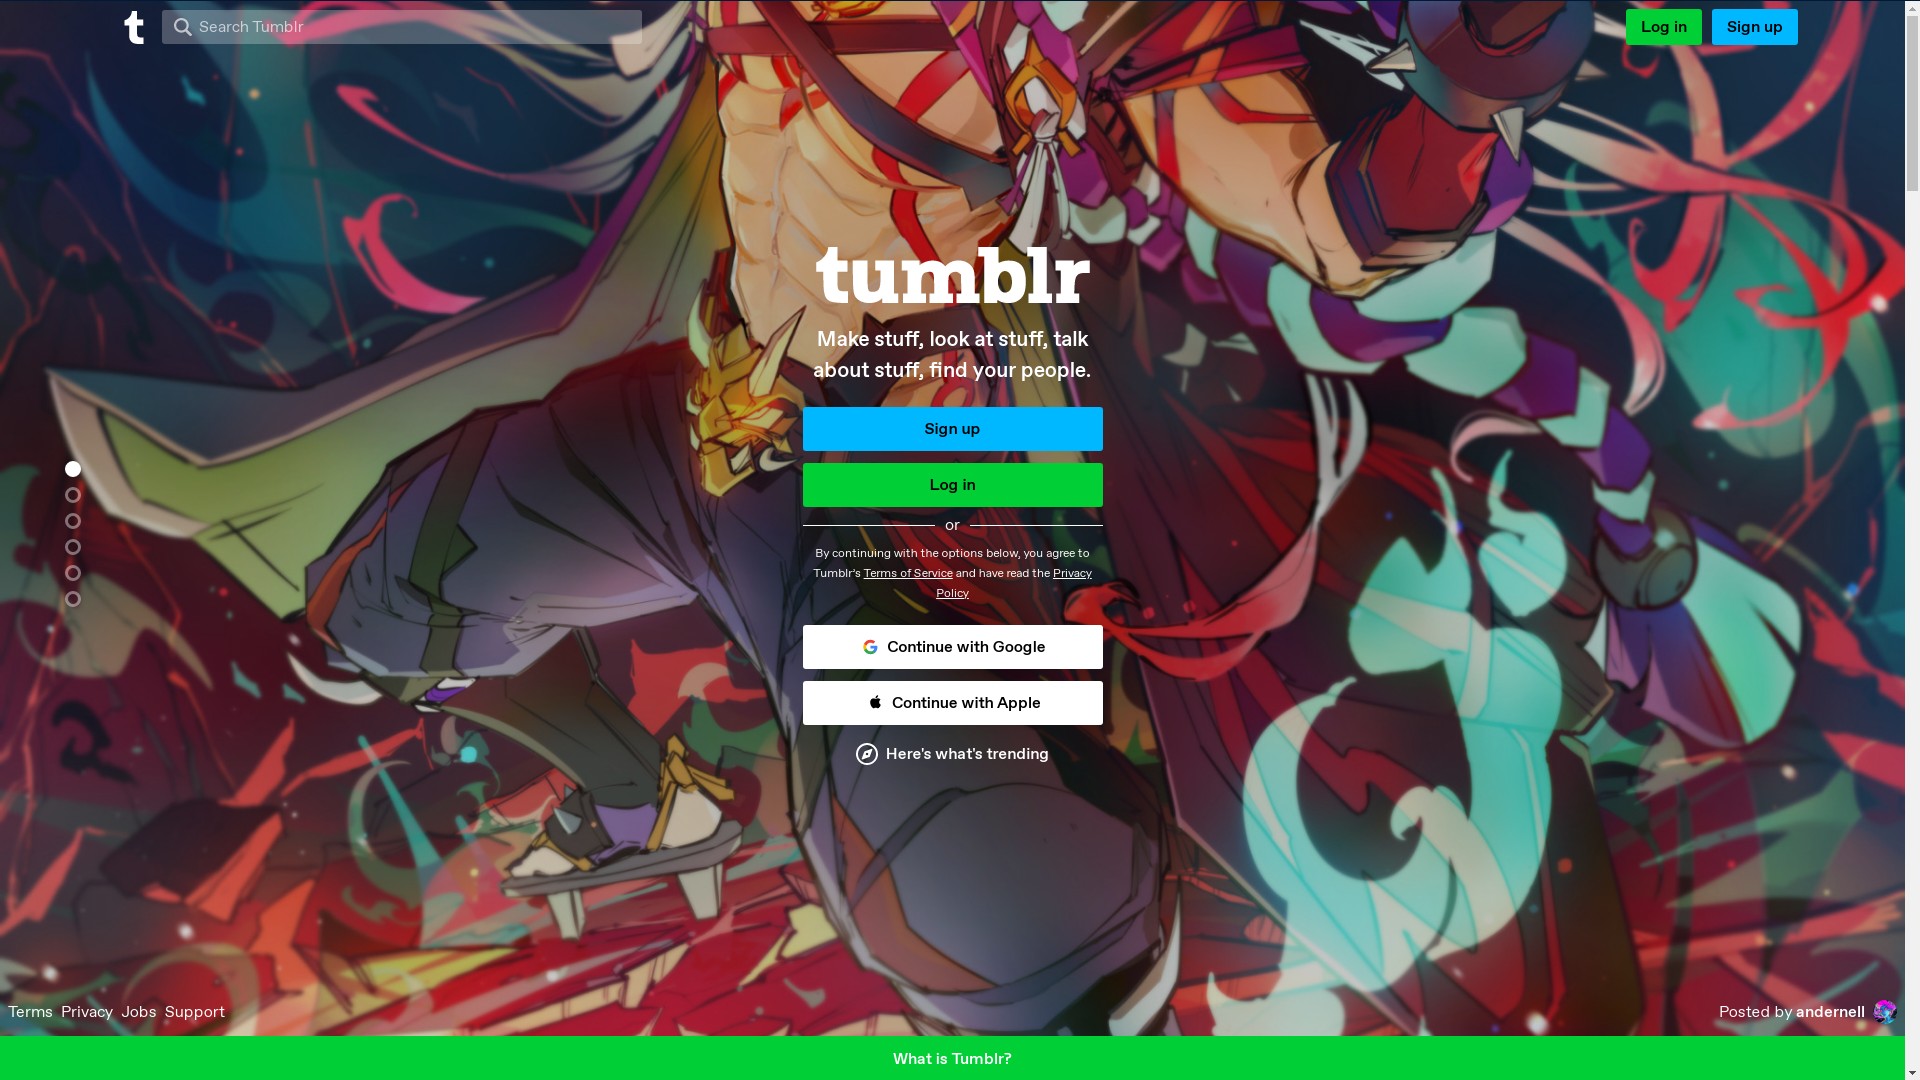 Tumblr is an American microblogging and social networking website founded by David Karp in 2007 and currently owned by Automattic.